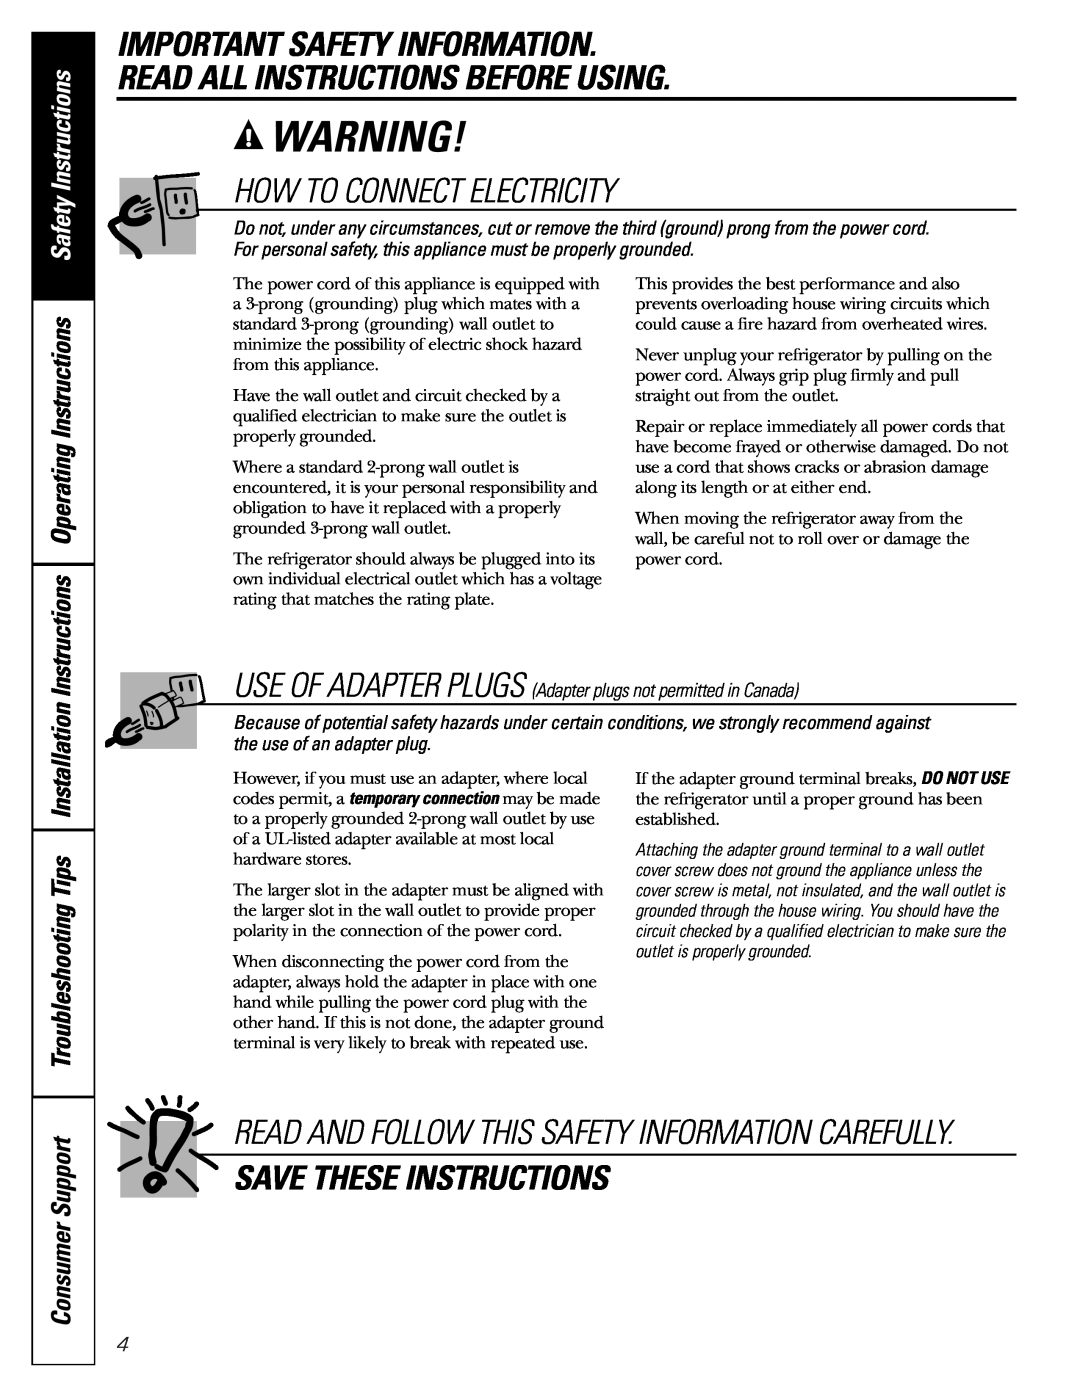 GE 197D3354P003 How To Connect Electricity, Save These Instructions, Read And Follow This Safety Information Carefully 